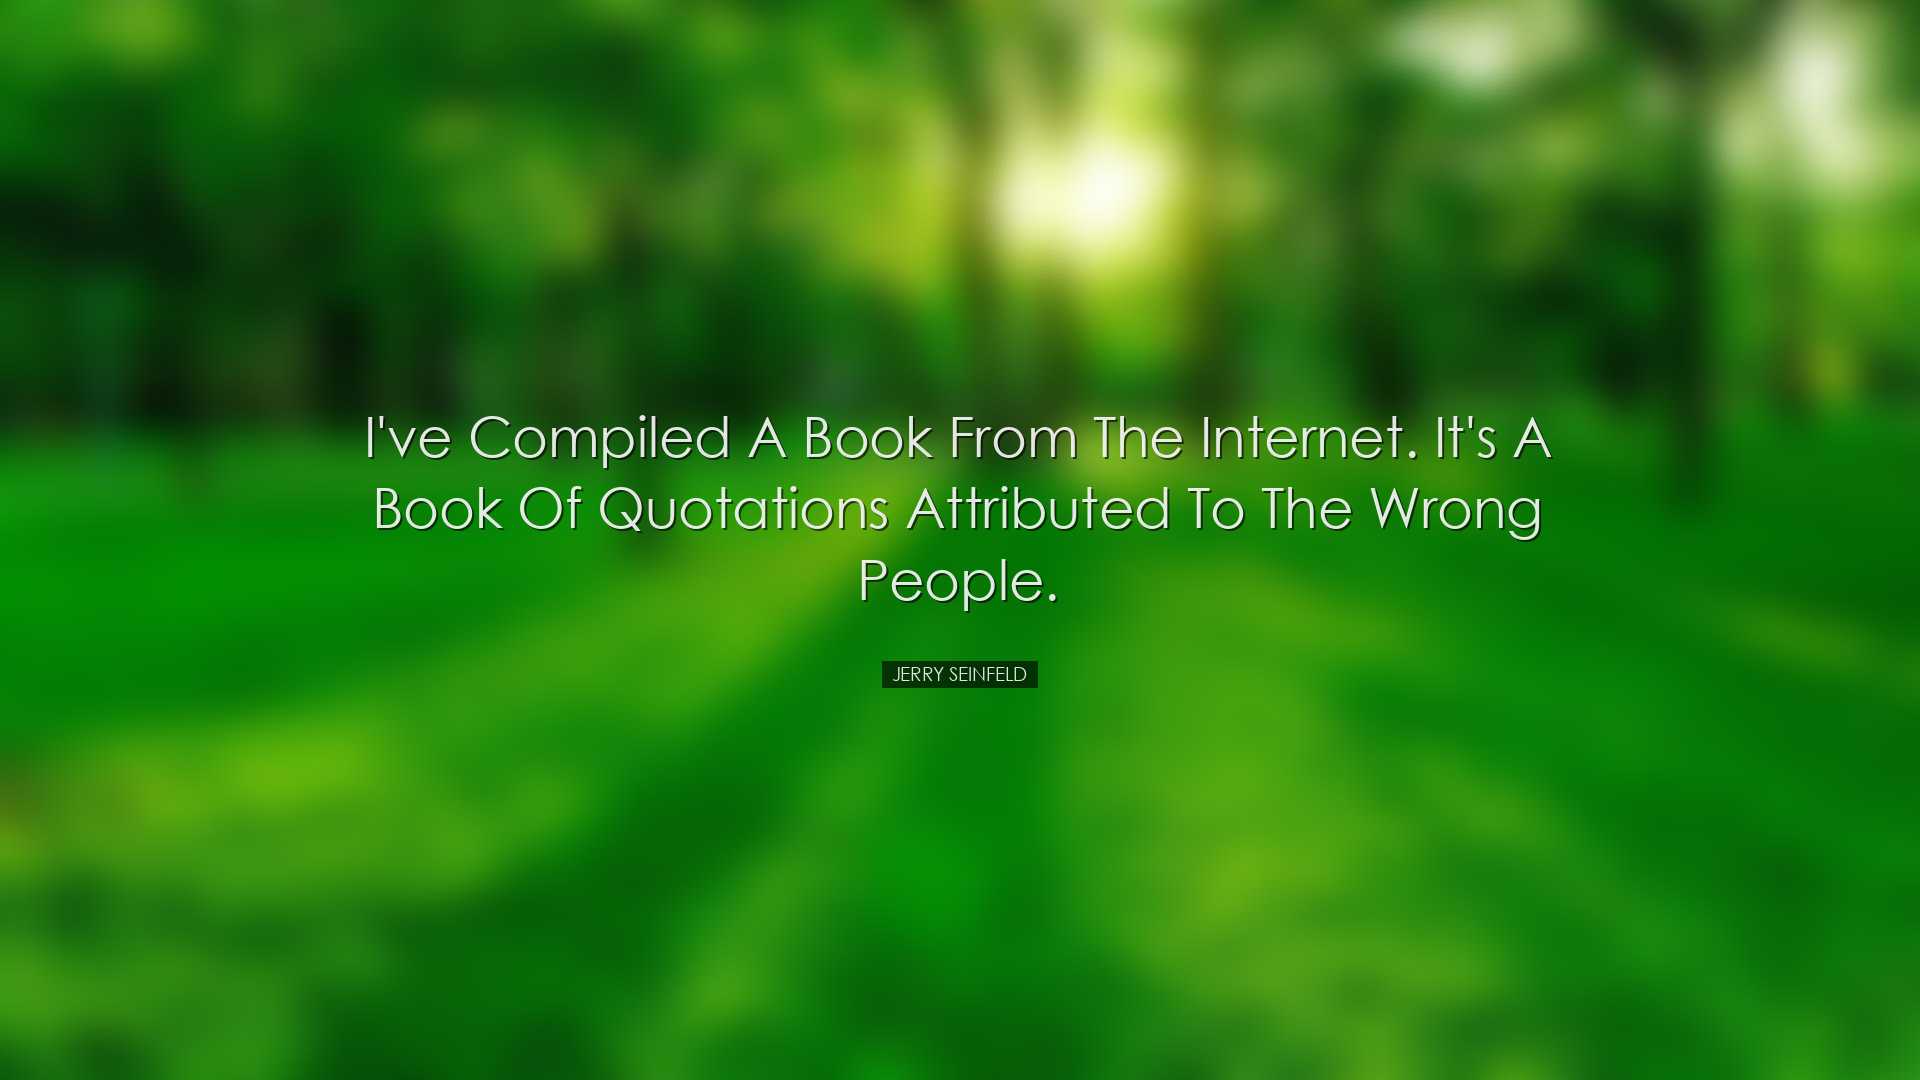 I've compiled a book from the Internet. It's a book of quotations